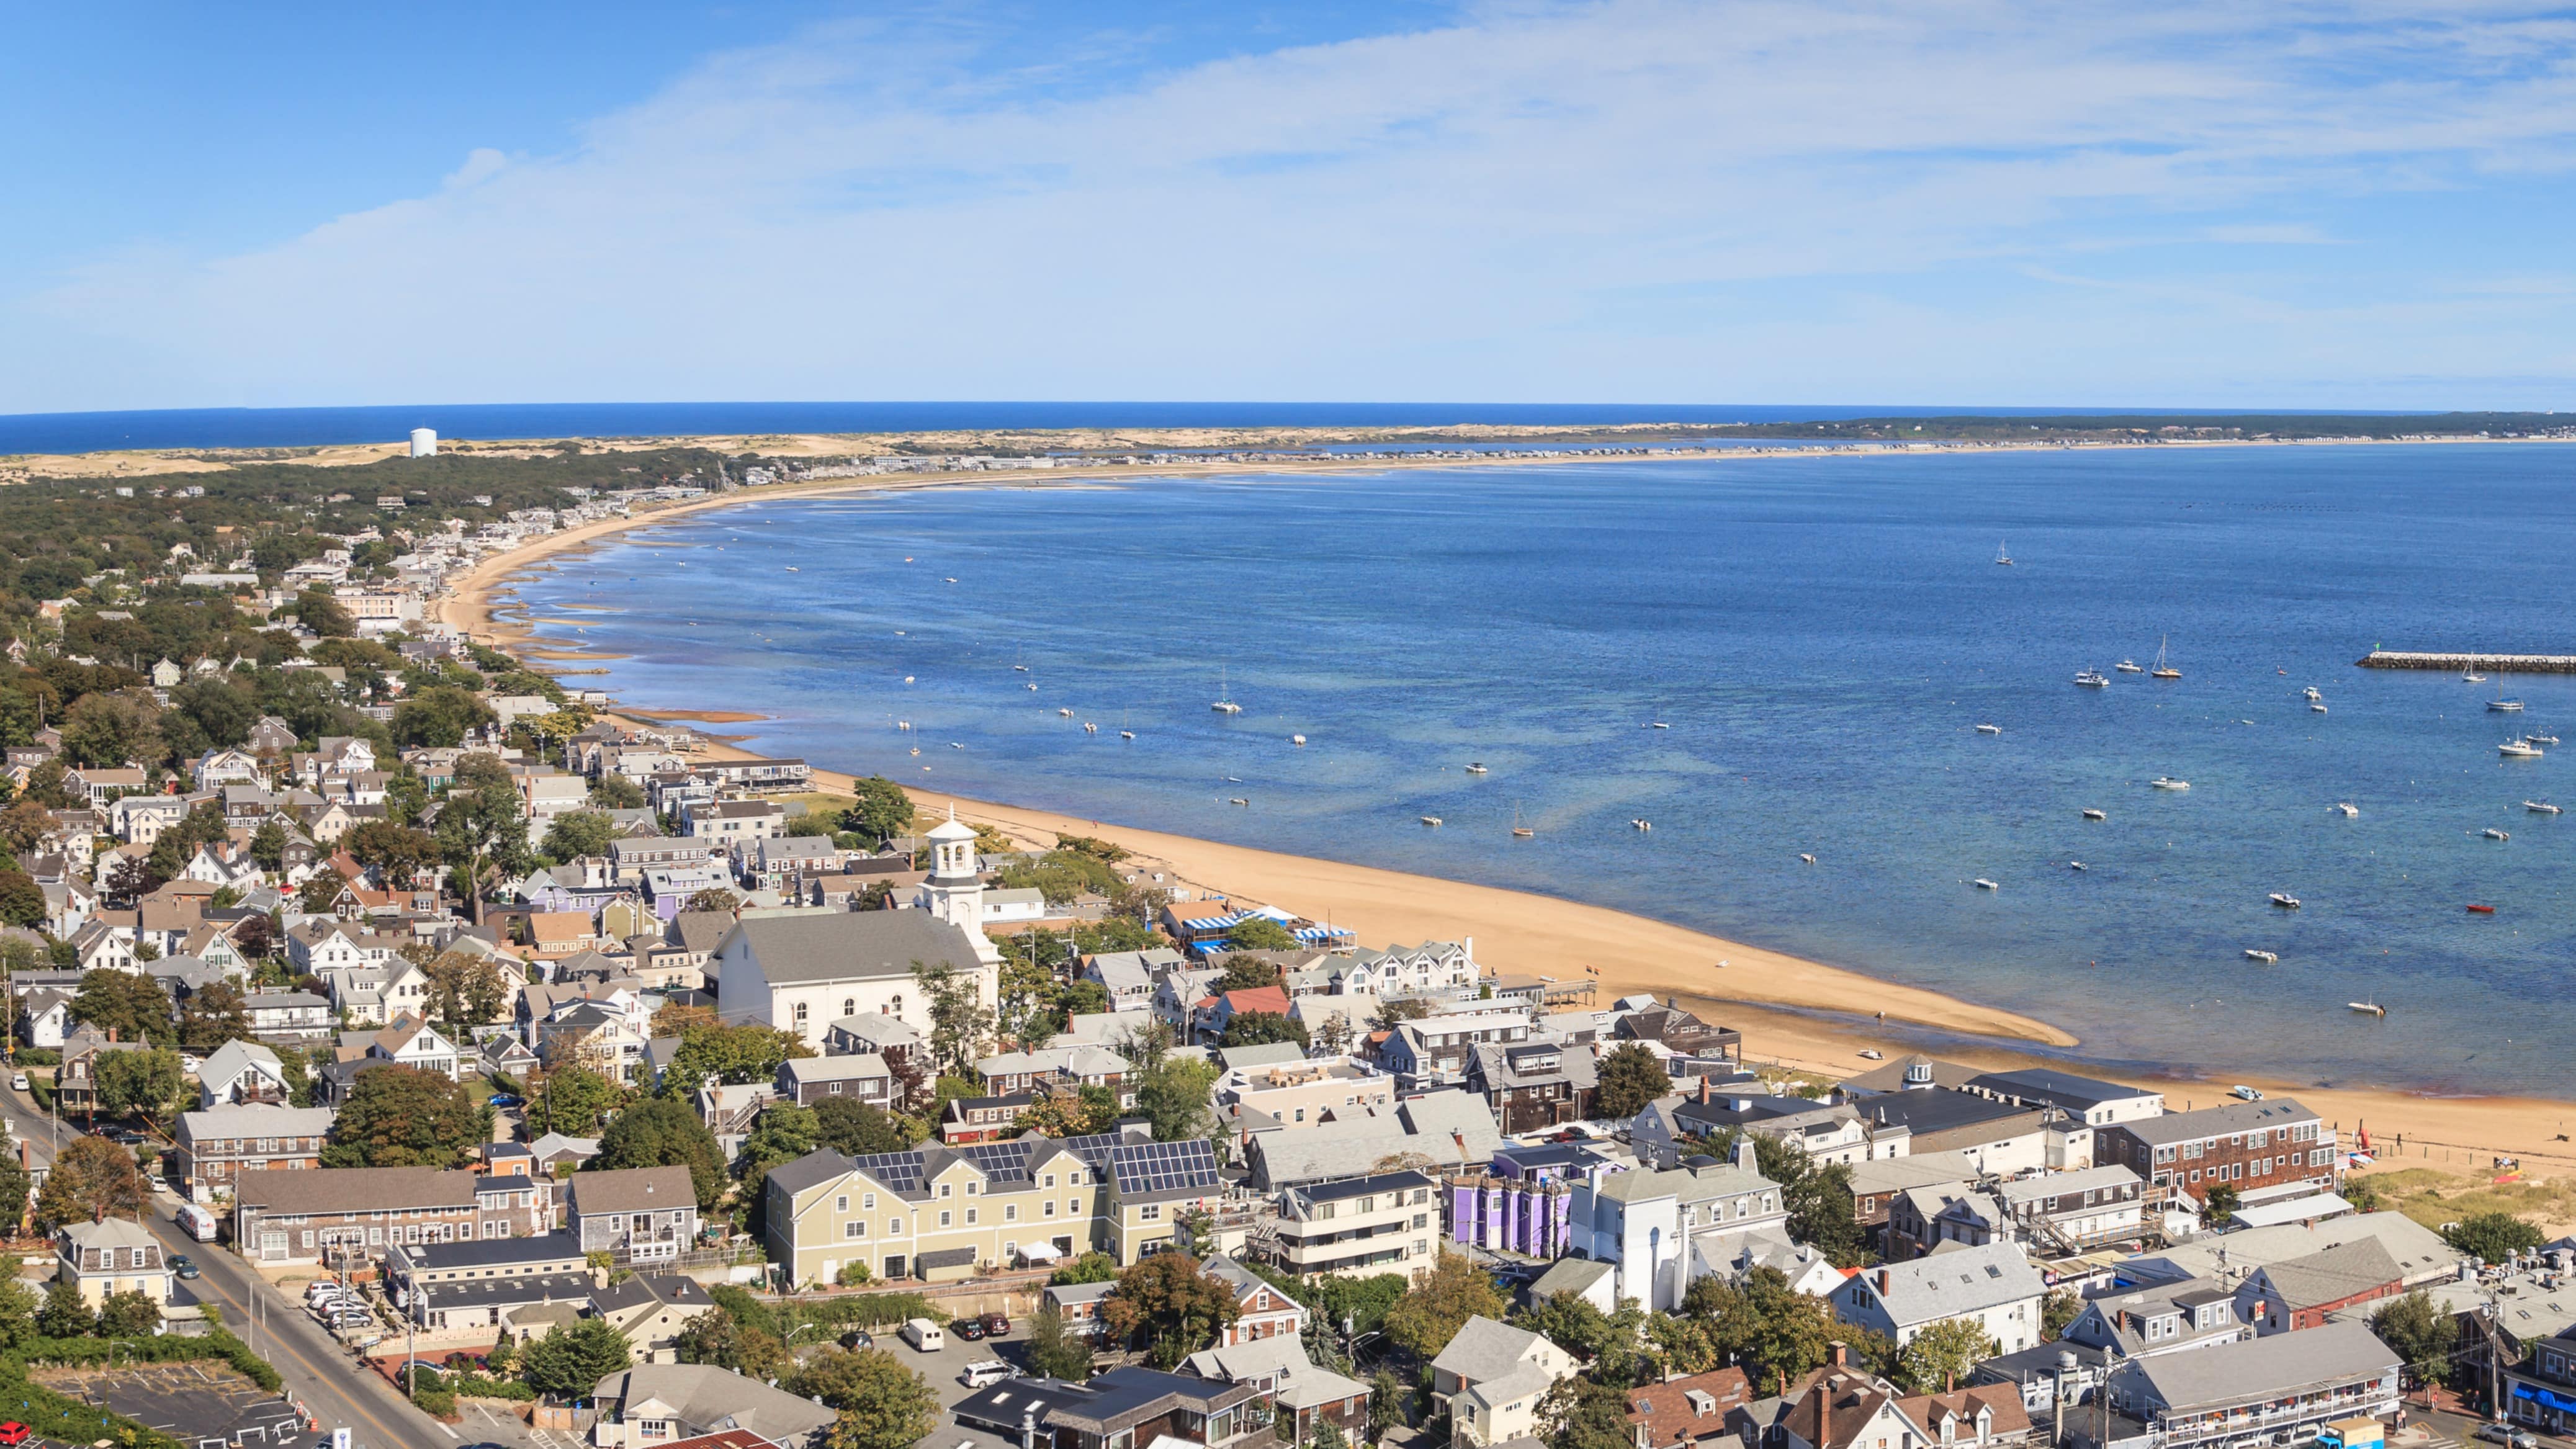 Discover activities and sights the whole family will enjoy in Cape Cod on a family vacation